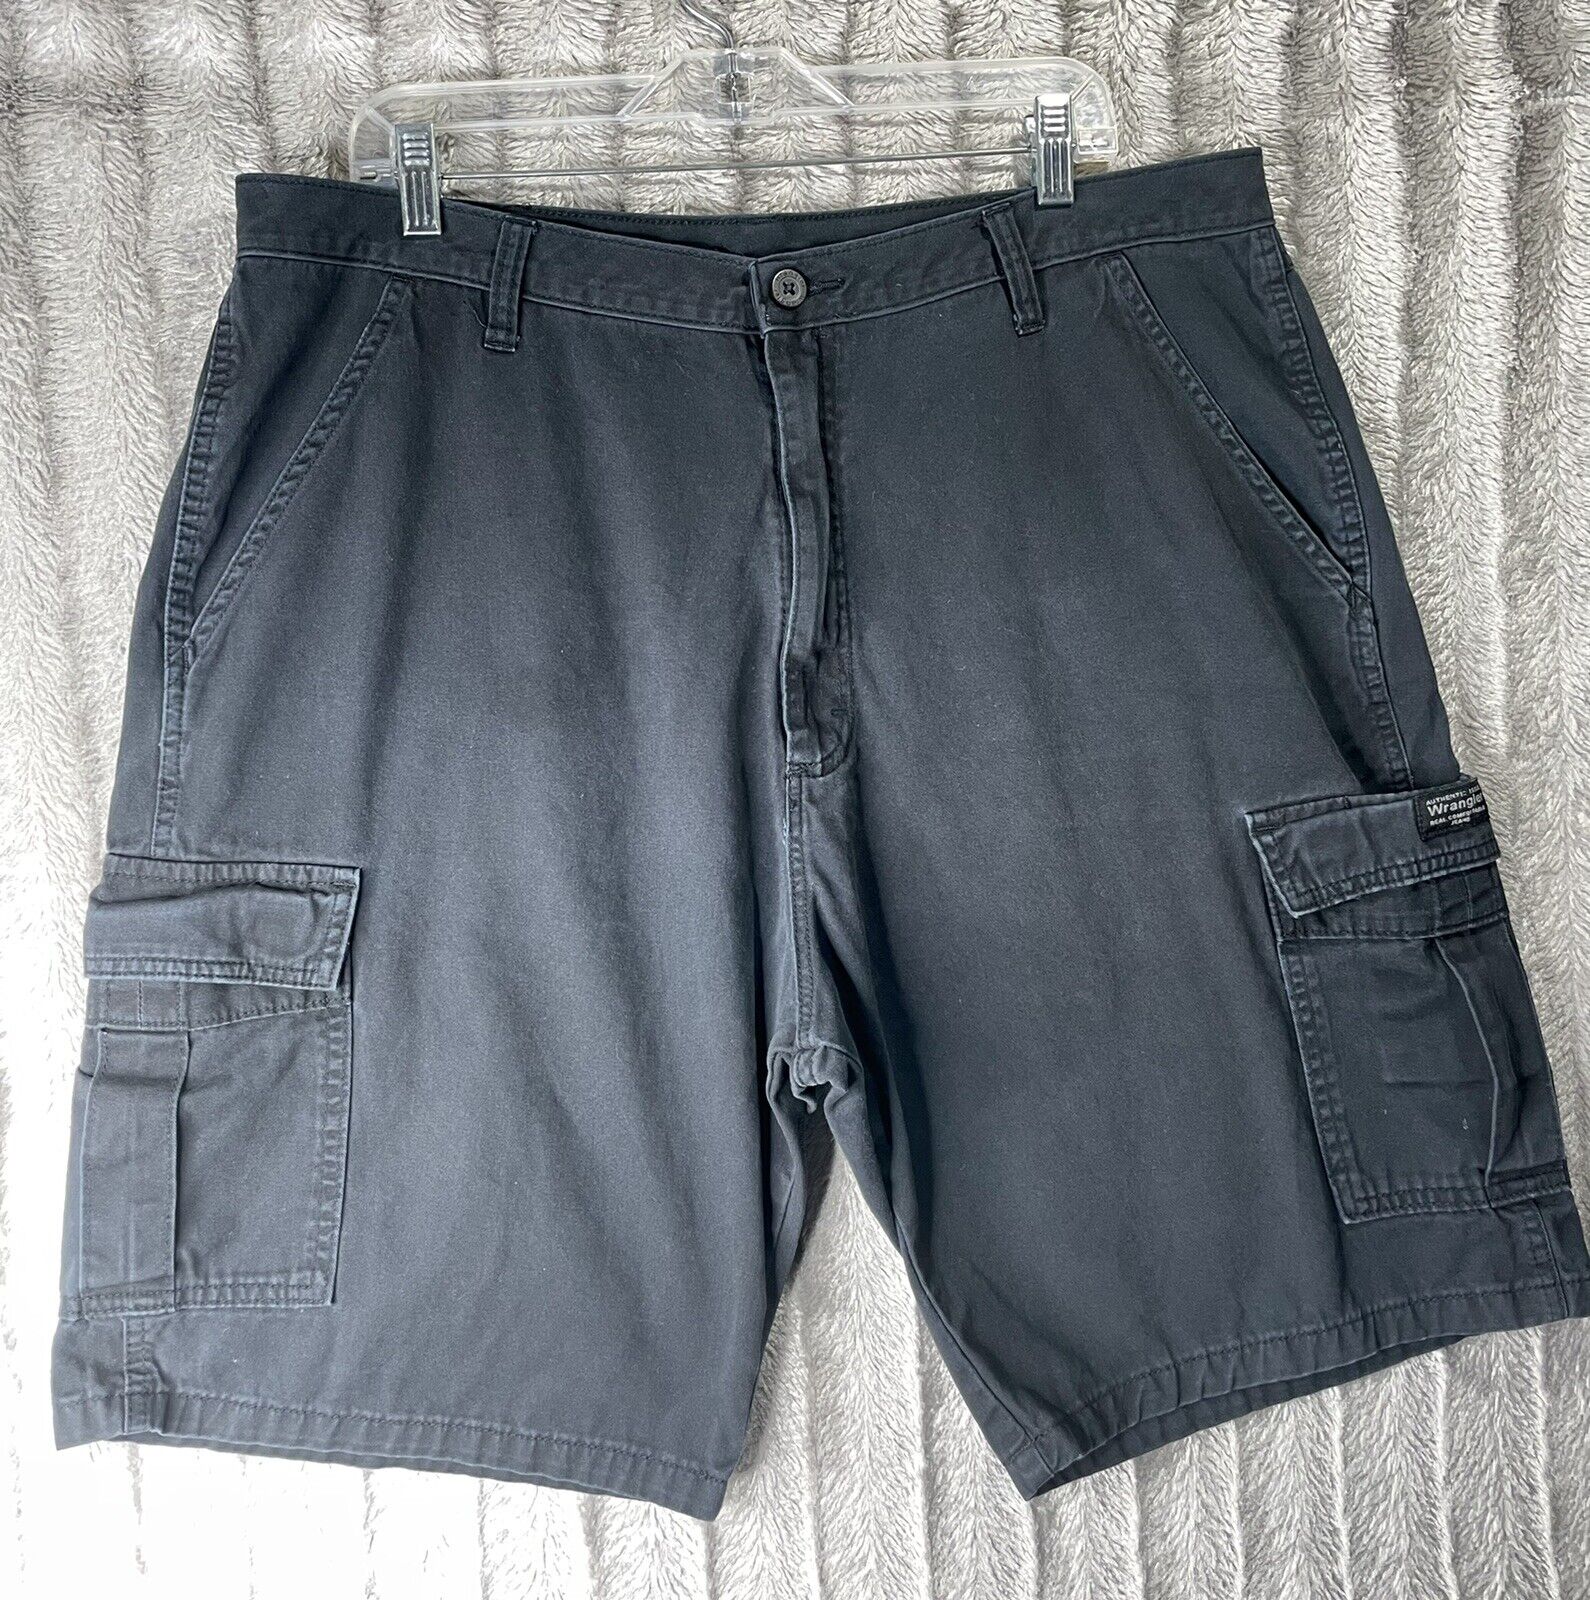 Actualizar 79+ imagen authentic issue wrangler real comfortable jeans shorts